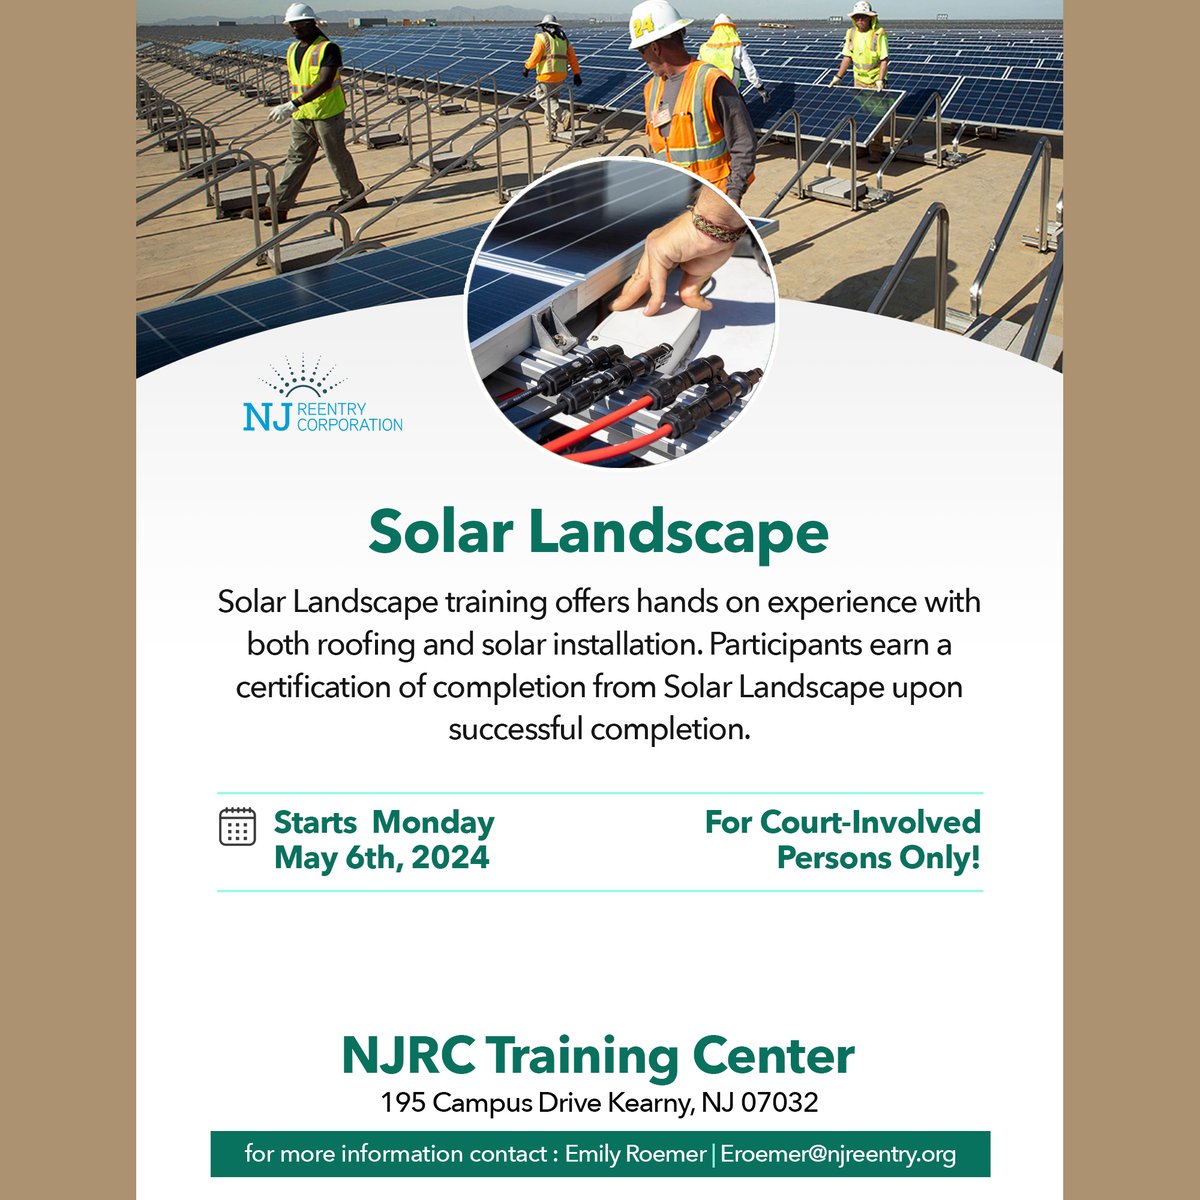 NJRC Training Center offers Solar Landscape course on Monday, May 6; learn fundamentals to install residential/commercial solar panels. Participants earn certification of completion from Solar Landscape upon successful completion. Contact: Emily Roemer | eroemer@njreentry.org